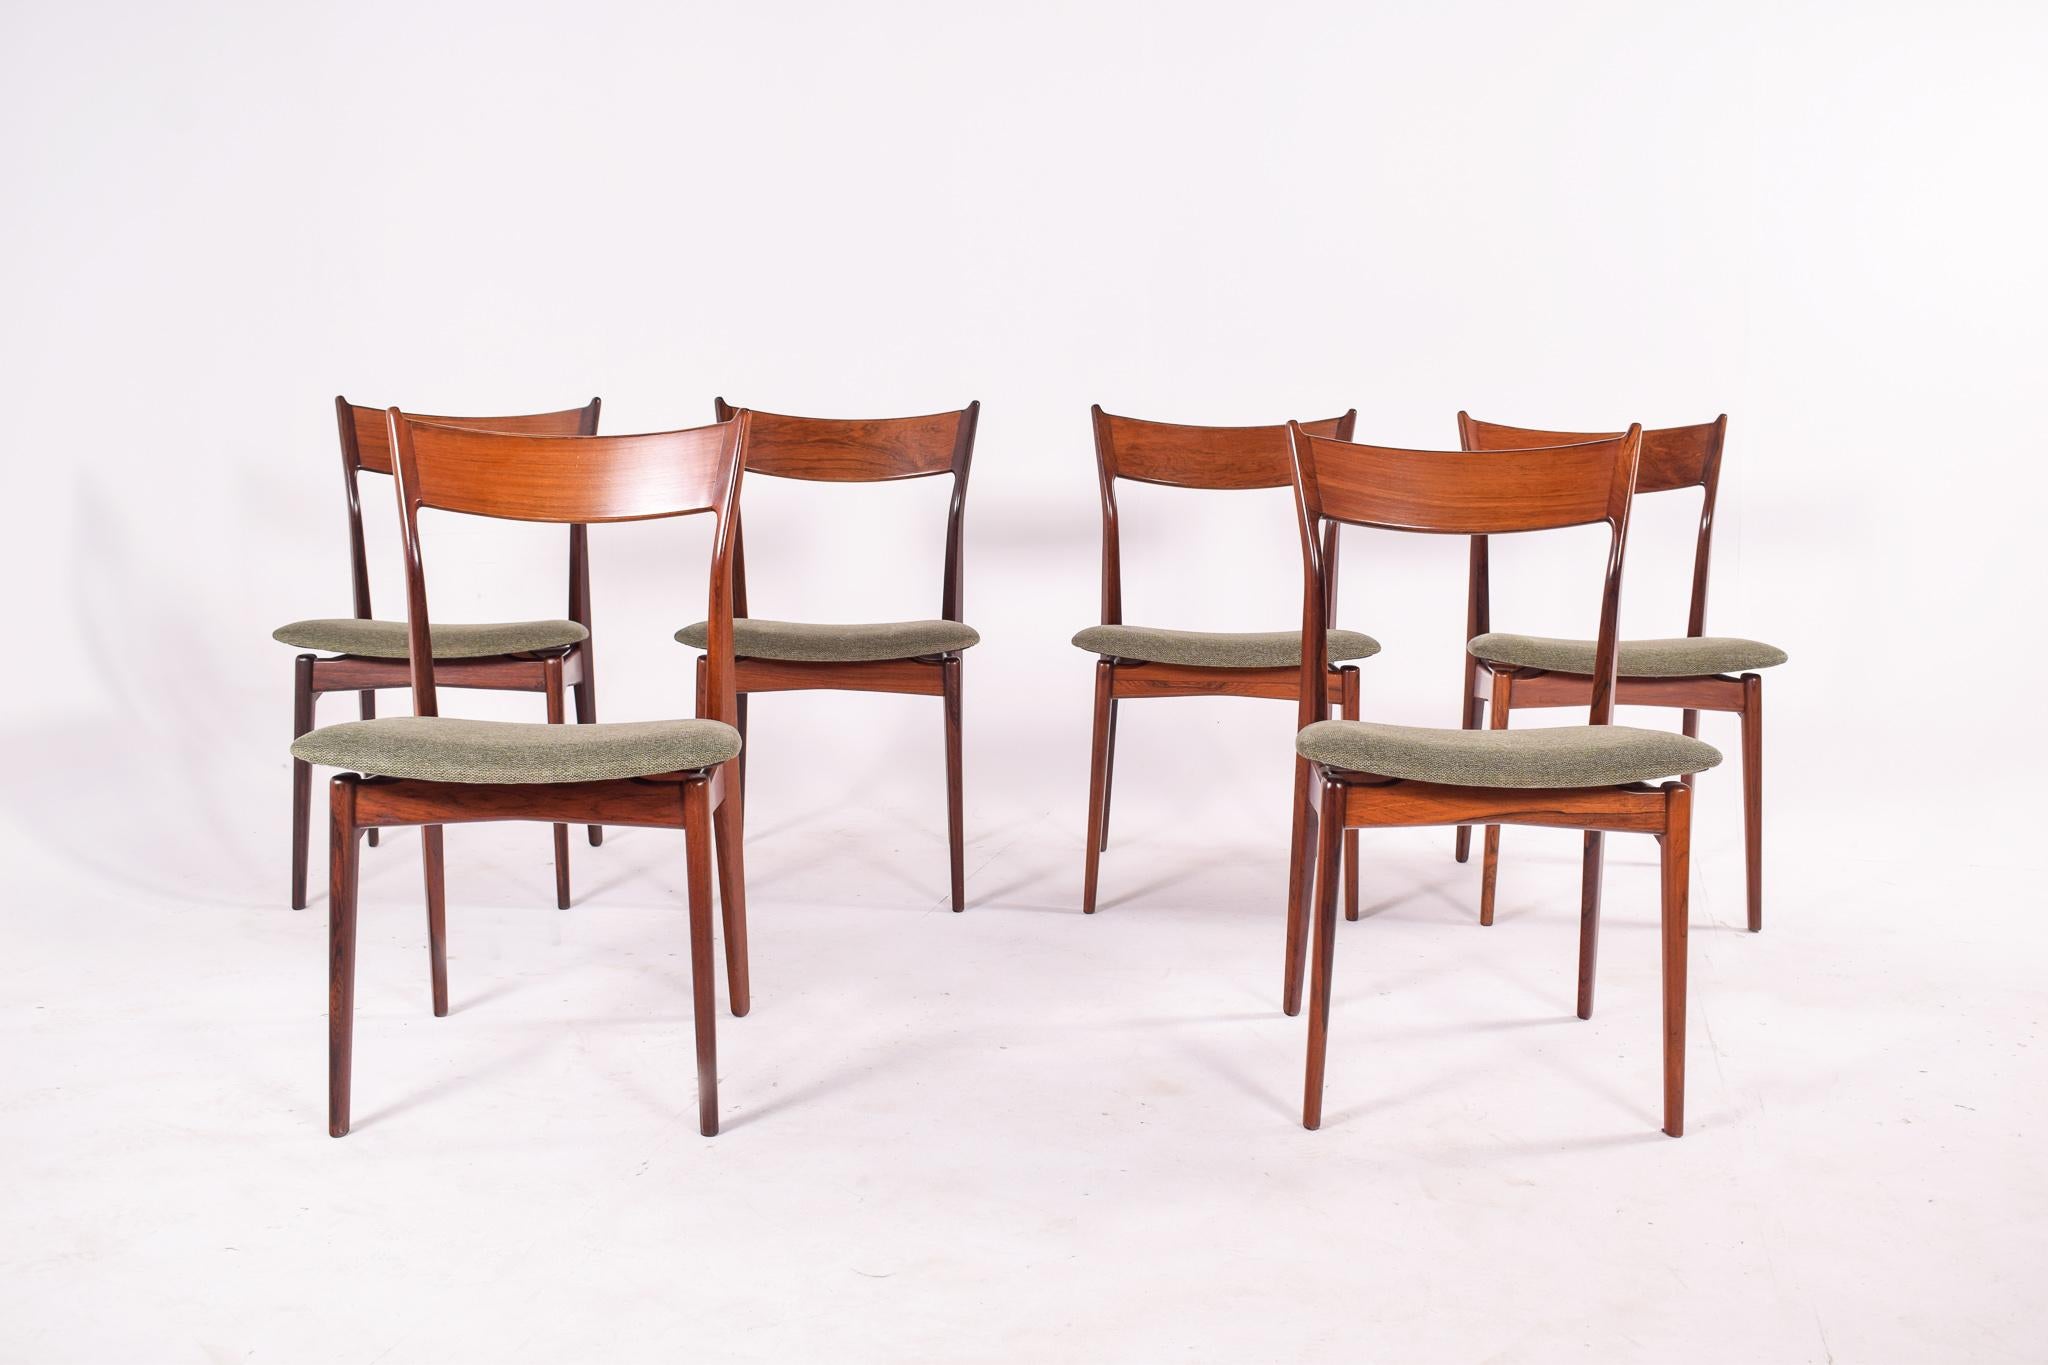 A wonderful set of 6 Danish rosewood dining chairs by HP Hansen. Newly upholstered seats in green wool textile.